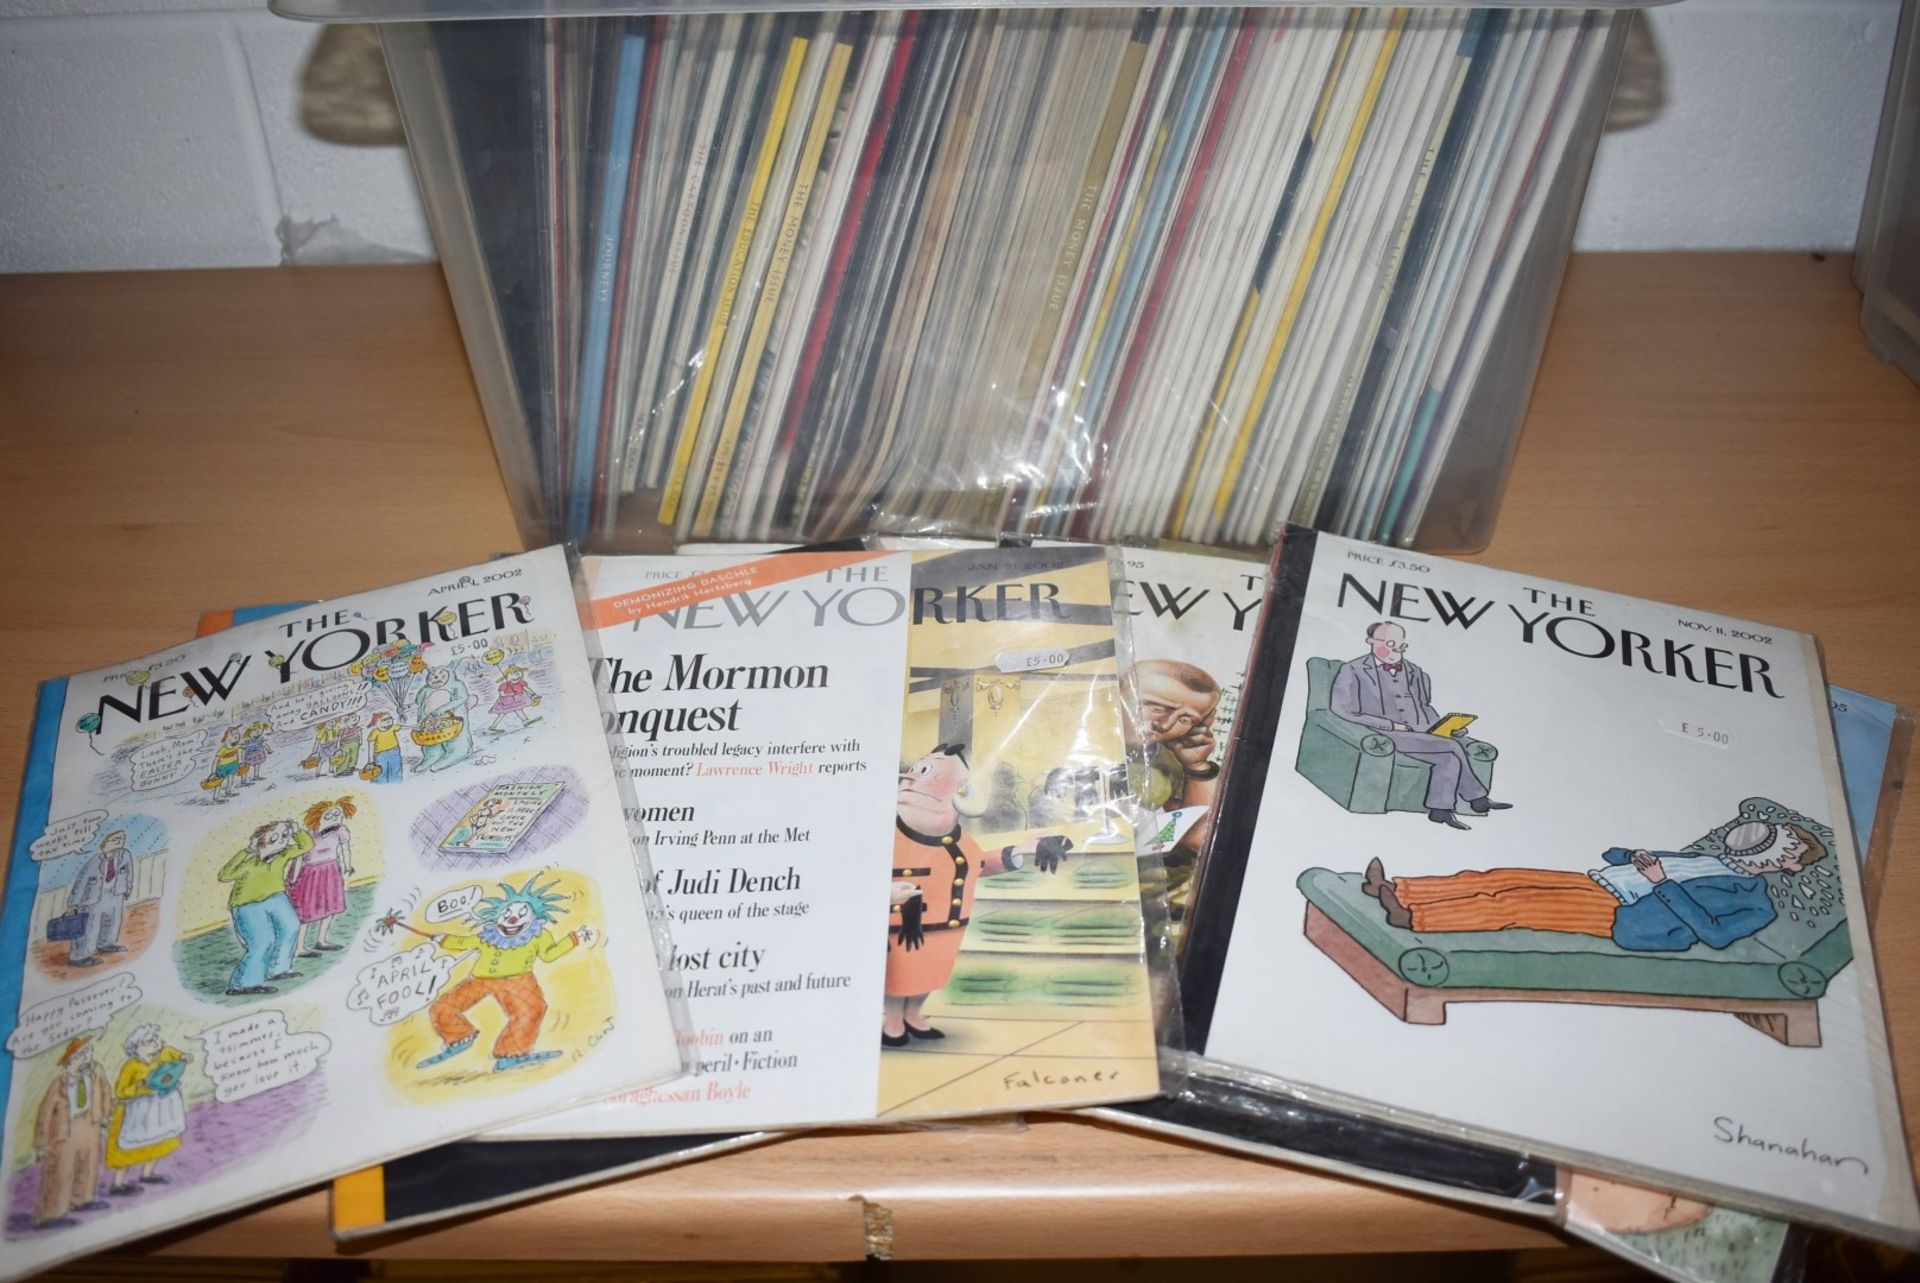 112 x New Yorker Magazines Dated 1997 to 2006 - Ref MB121 - CL431 - Location: Altrincham WA14